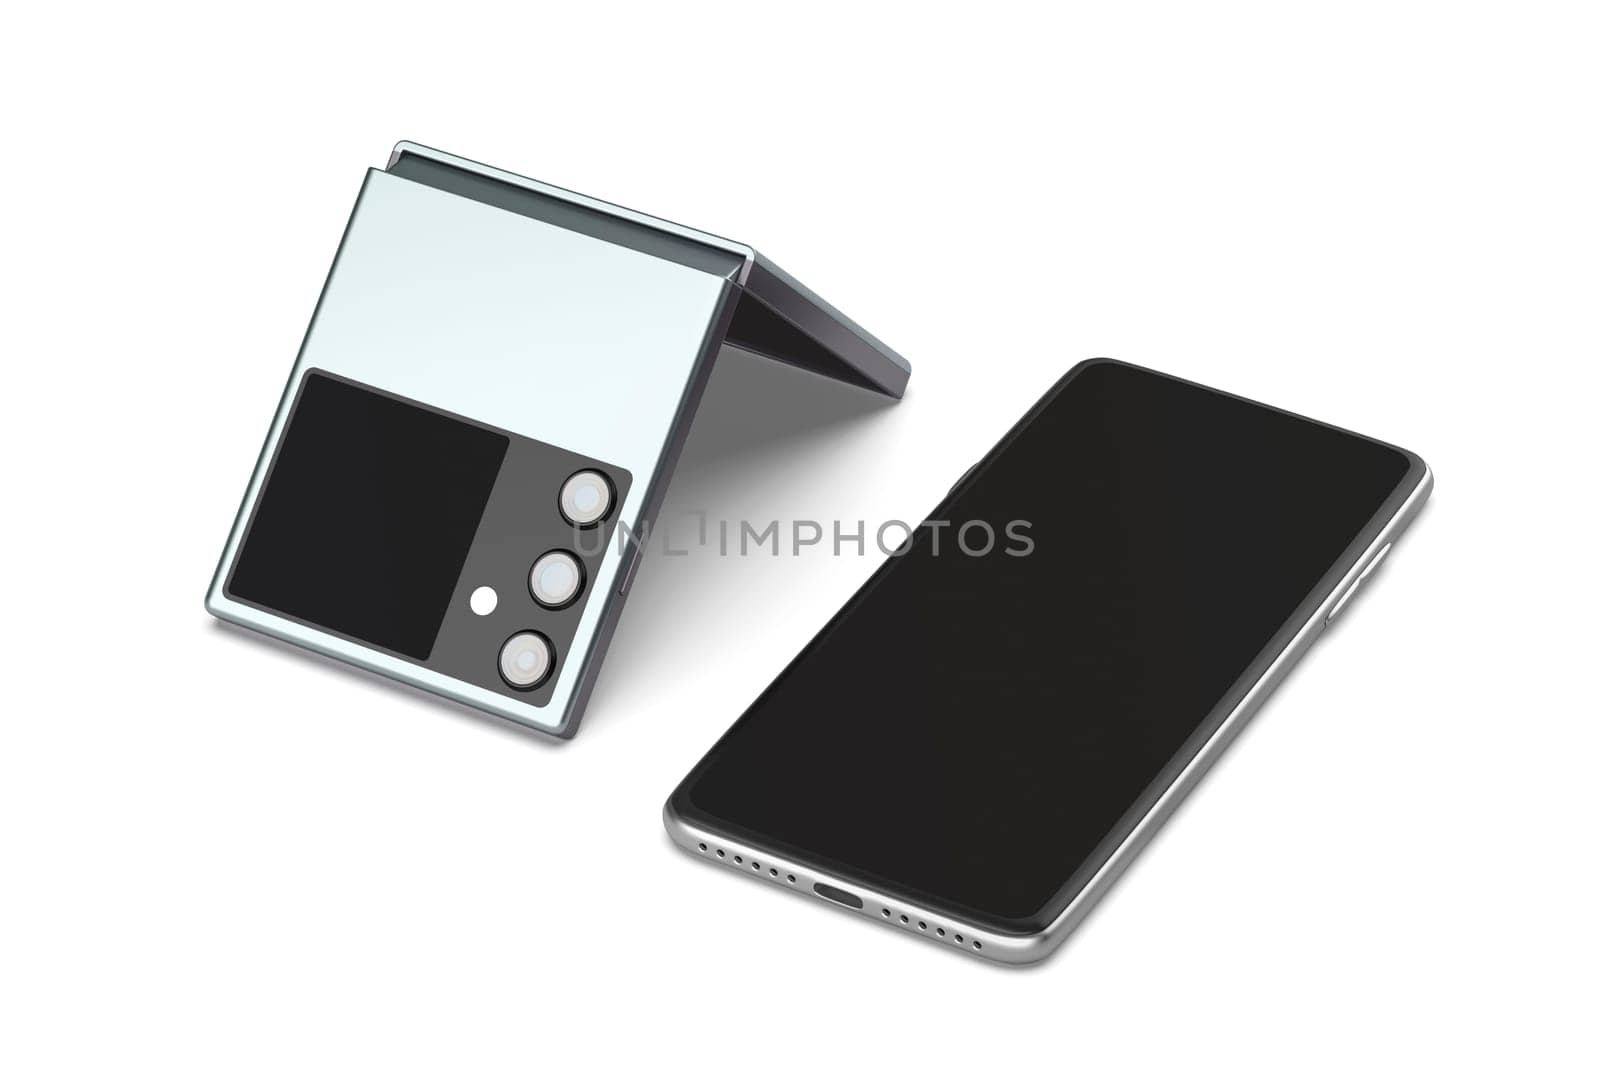 Two modern smartphones with different form factors on white background